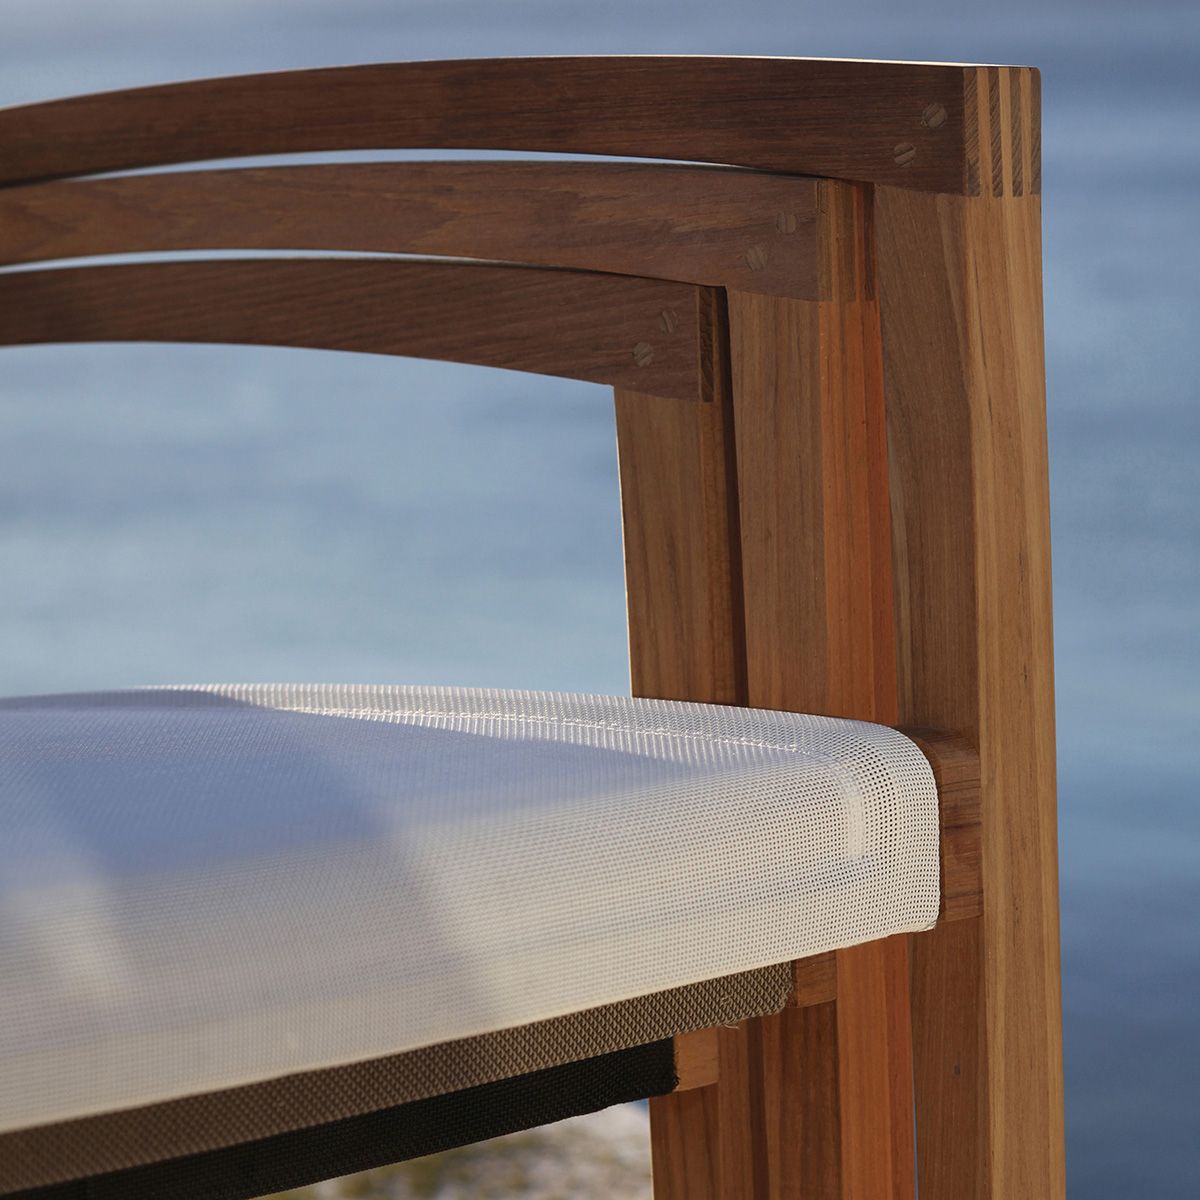 Xqi Reclinable Lounger In Teak With Batyline Bronze